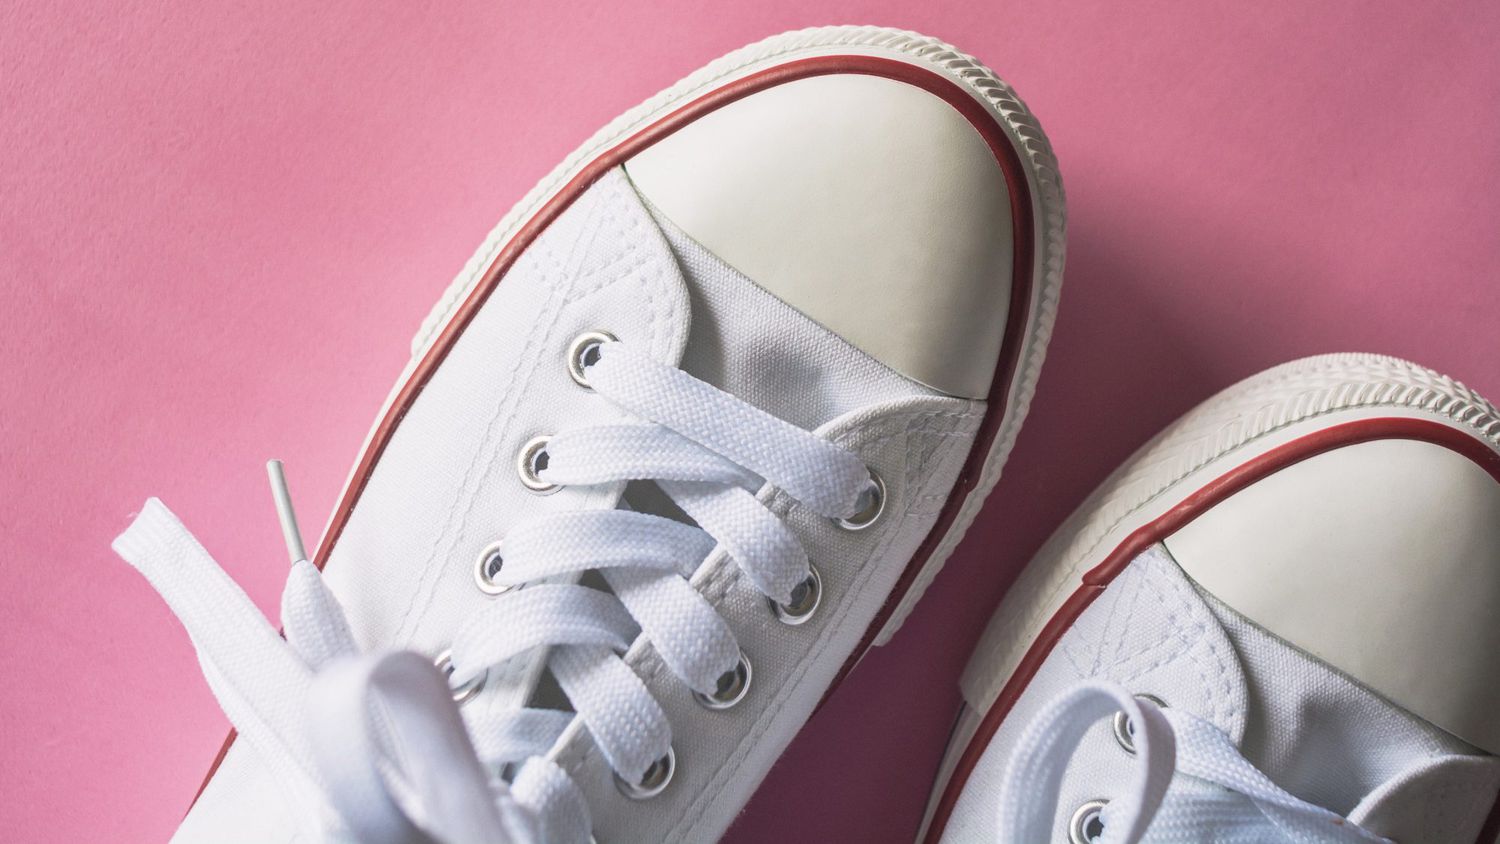 How to Clean White Shoes at Home Without Bleach or Expensive Cleaners |  Real Simple